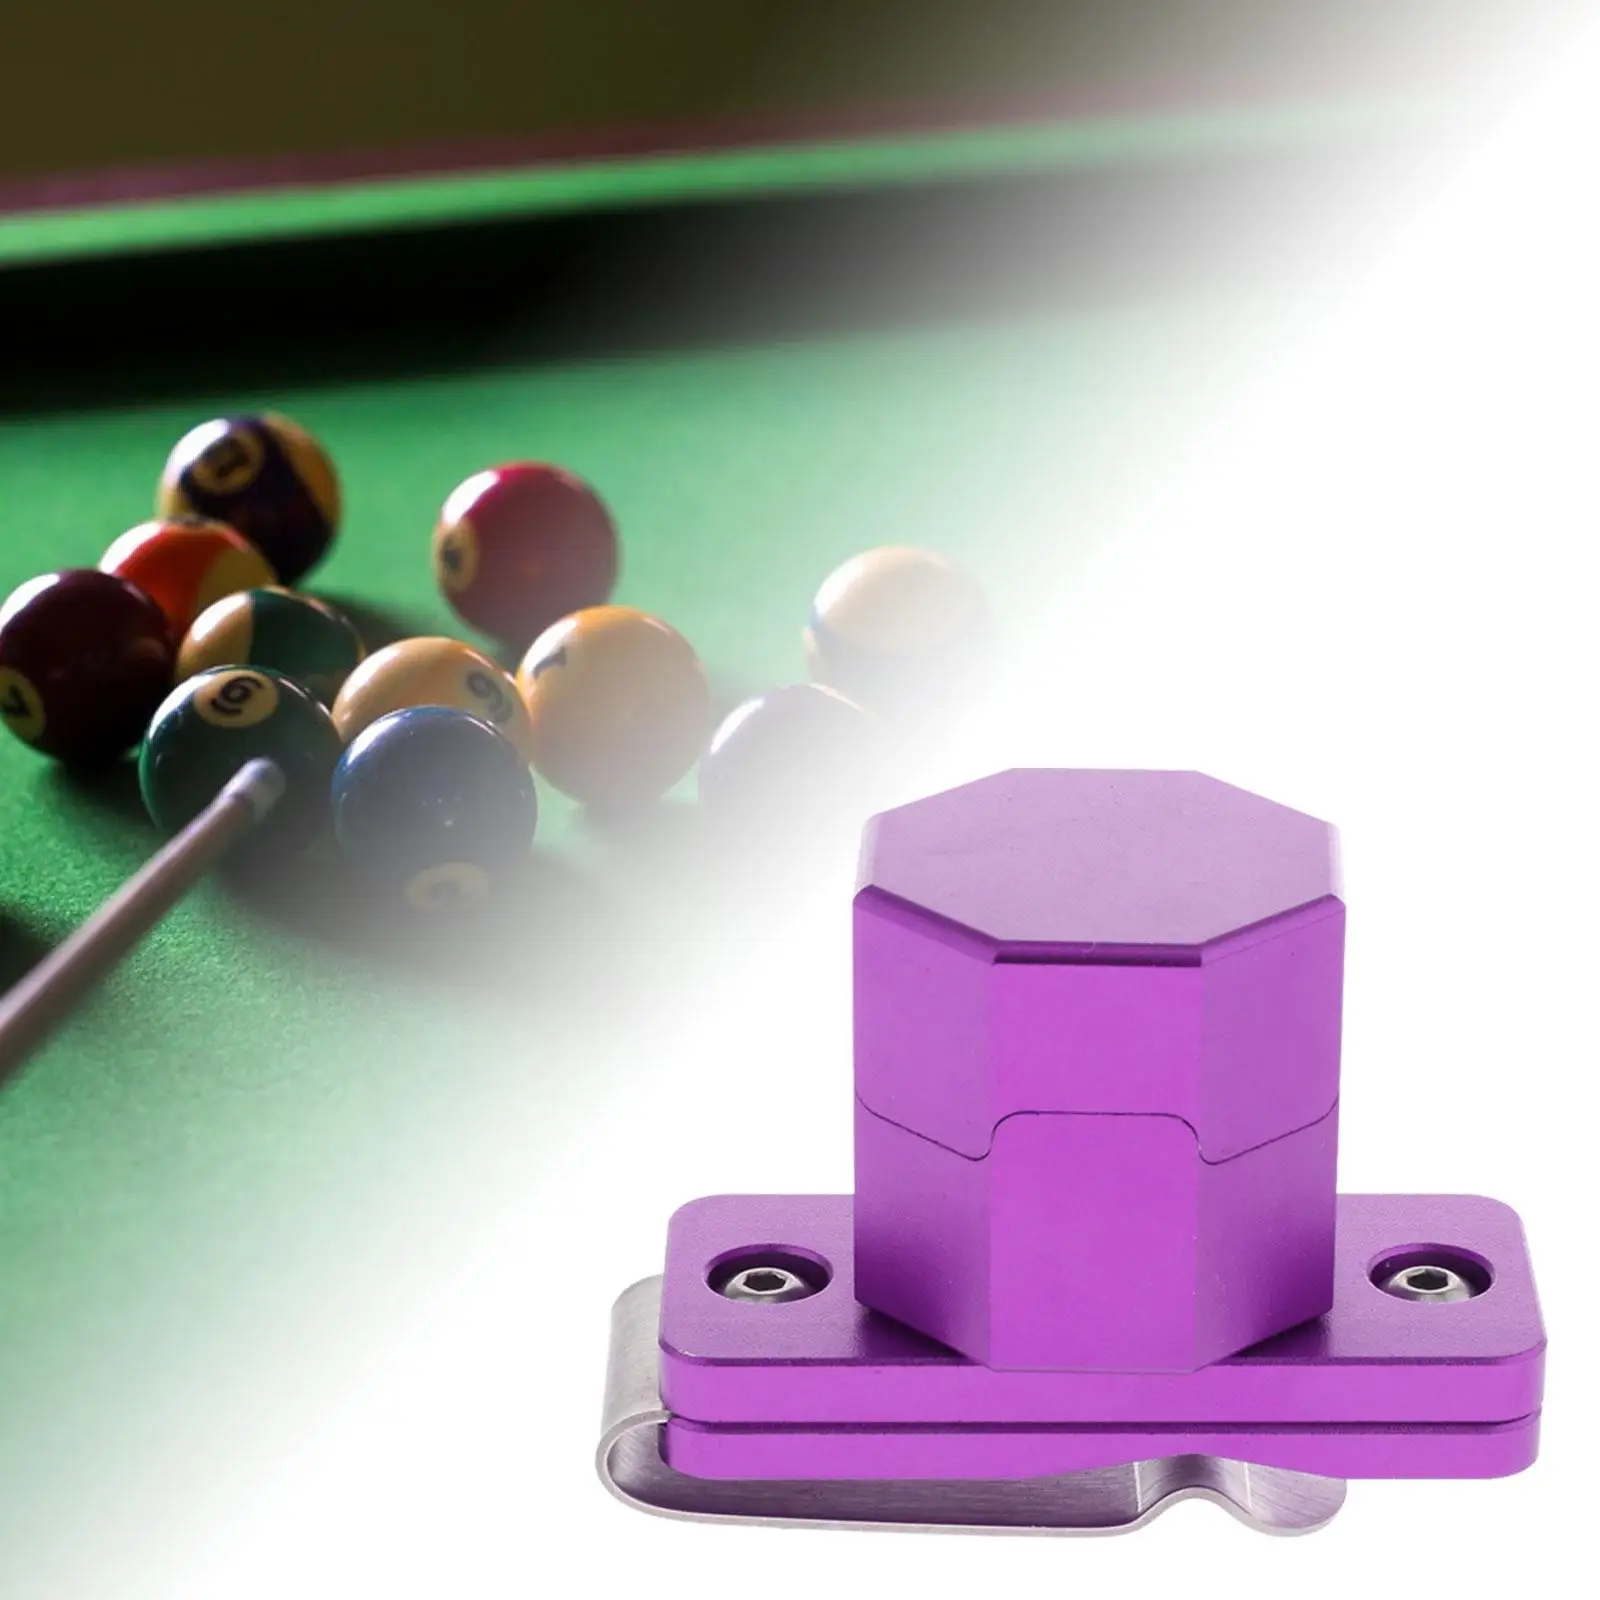 Billiards Snooker Pool Cue Chalk Holder with Clip Metal Snooker Accessories